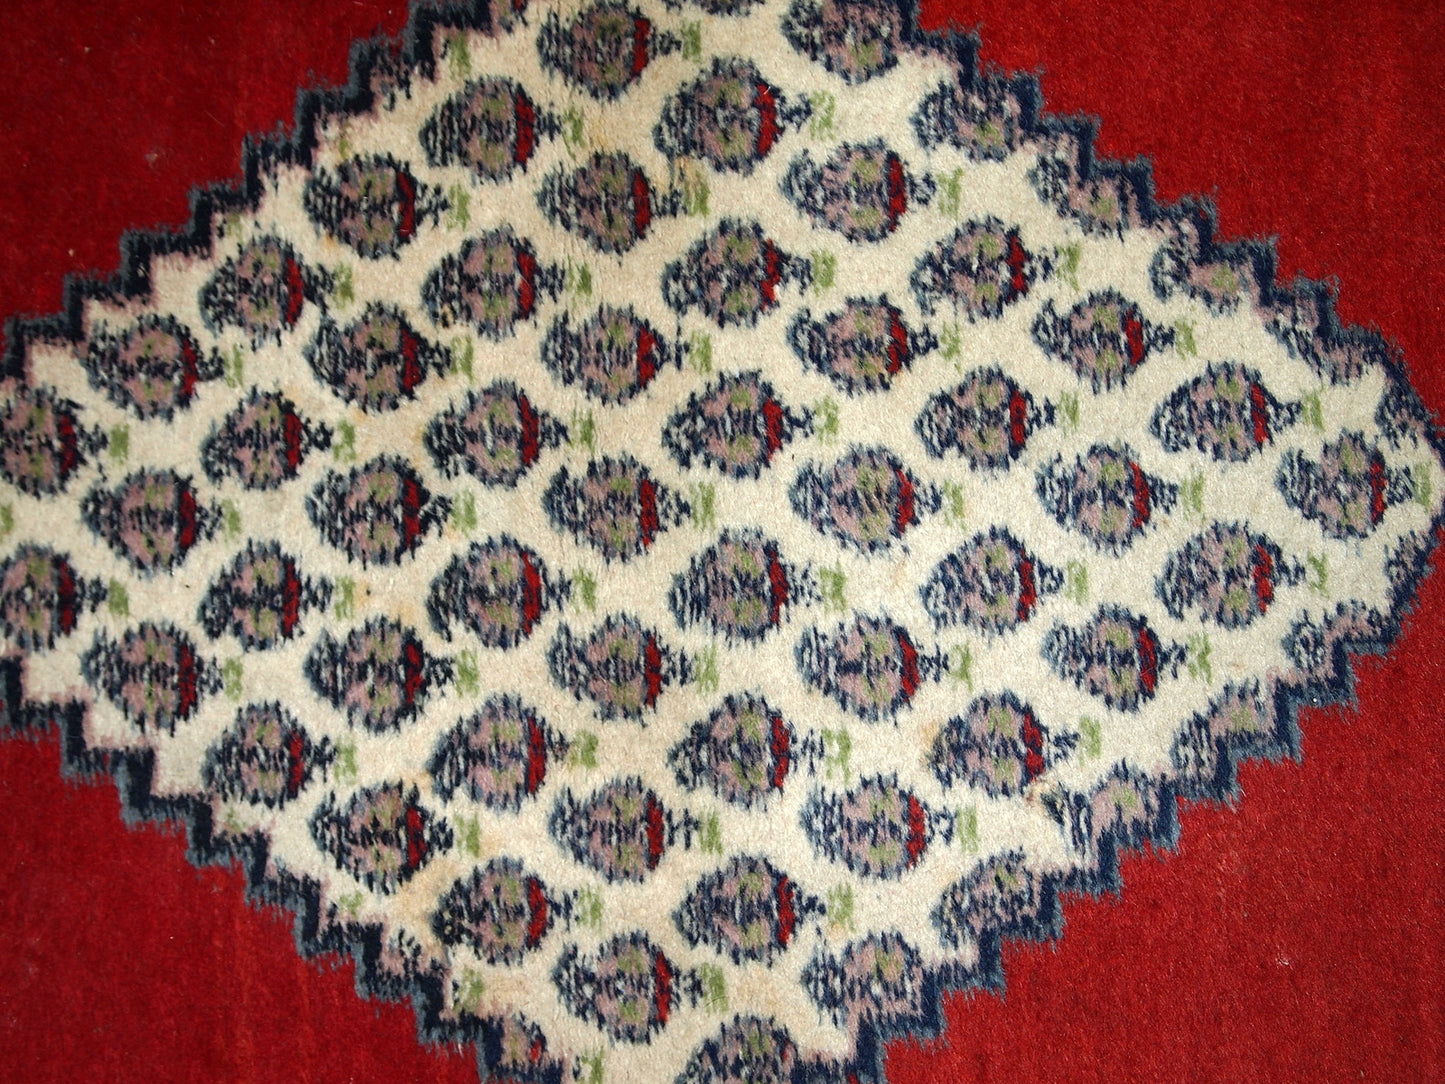 Vintage handmade Indian rug from the end of 20th century. The rug is in original good condition in red and beige wool.